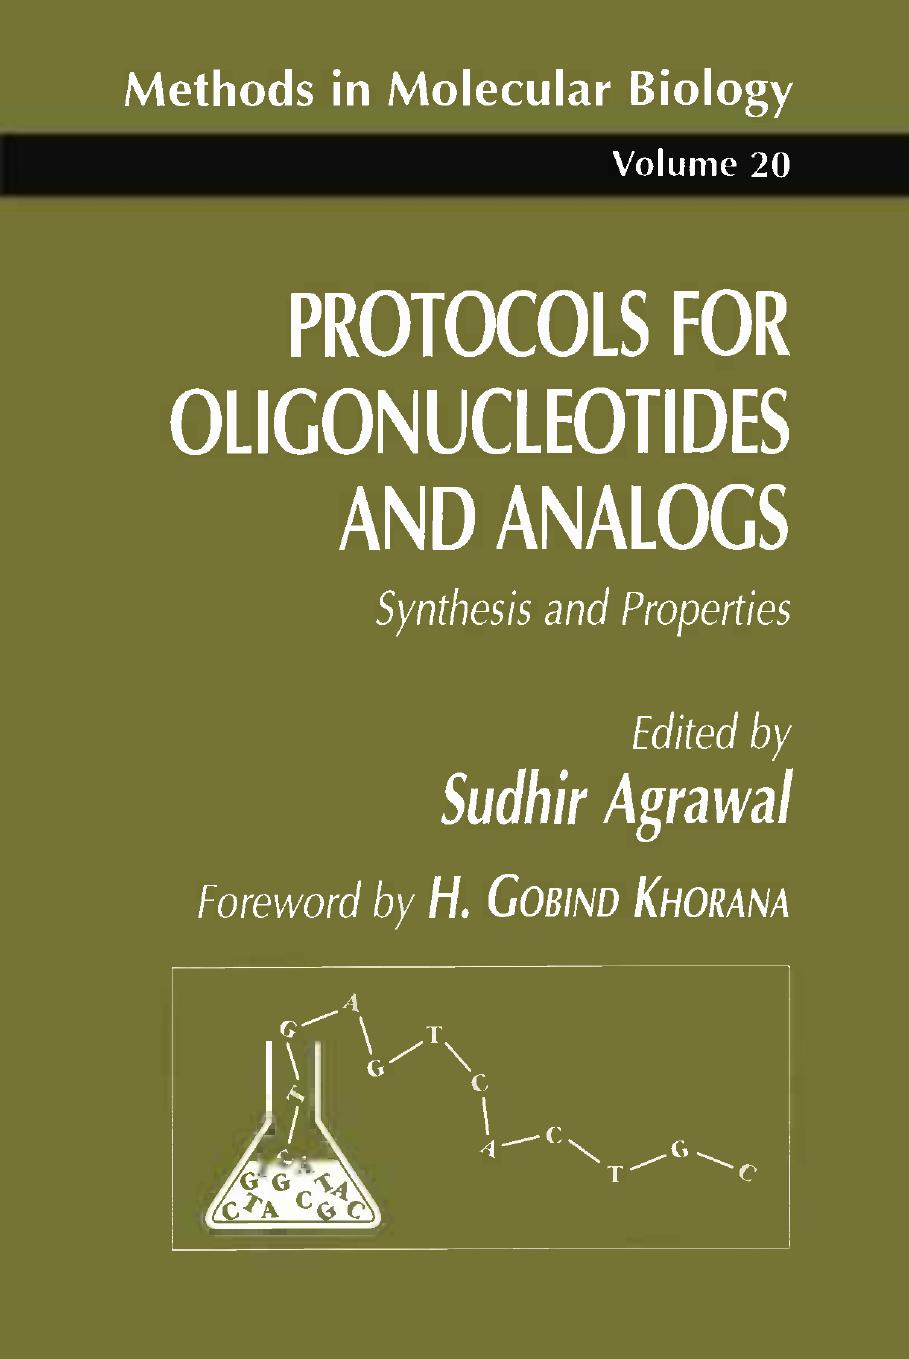 Protocols for Oligonucleotides and Analogs: Synthesis and Properties (Methods in Molecular Biology, 20) 1993rd Edition by Sudhir Agrawal 